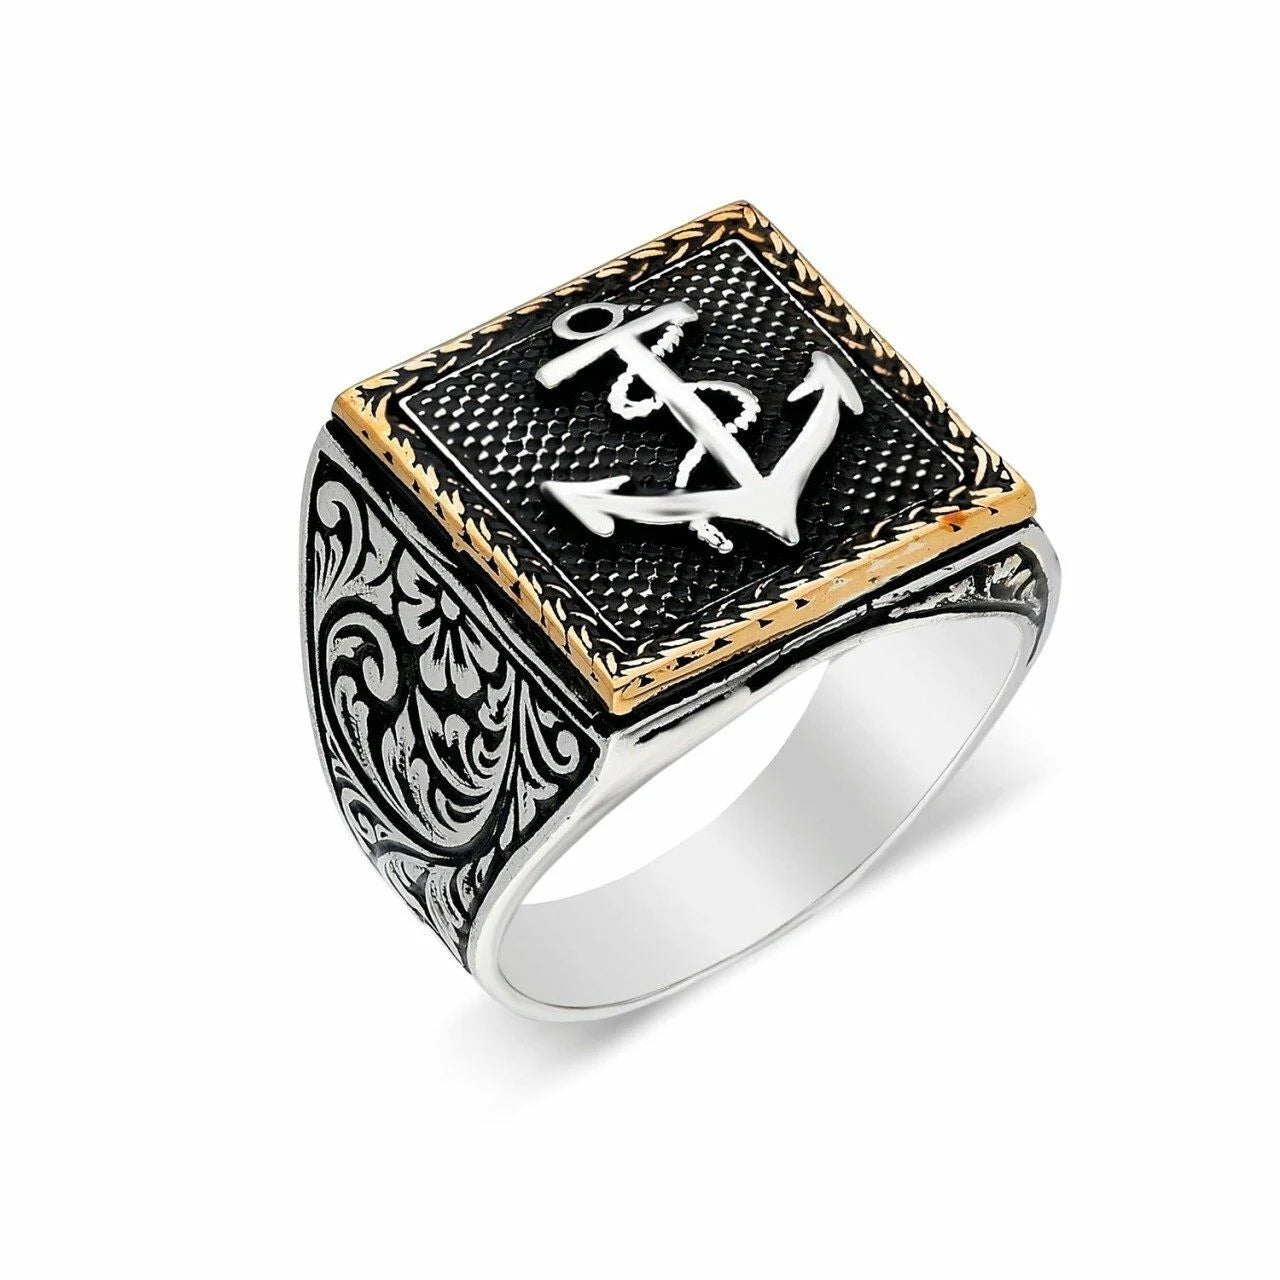 Anchor Ring - 925 Silver Square Maritime Design with Engraved Sides |  OrlaSilver